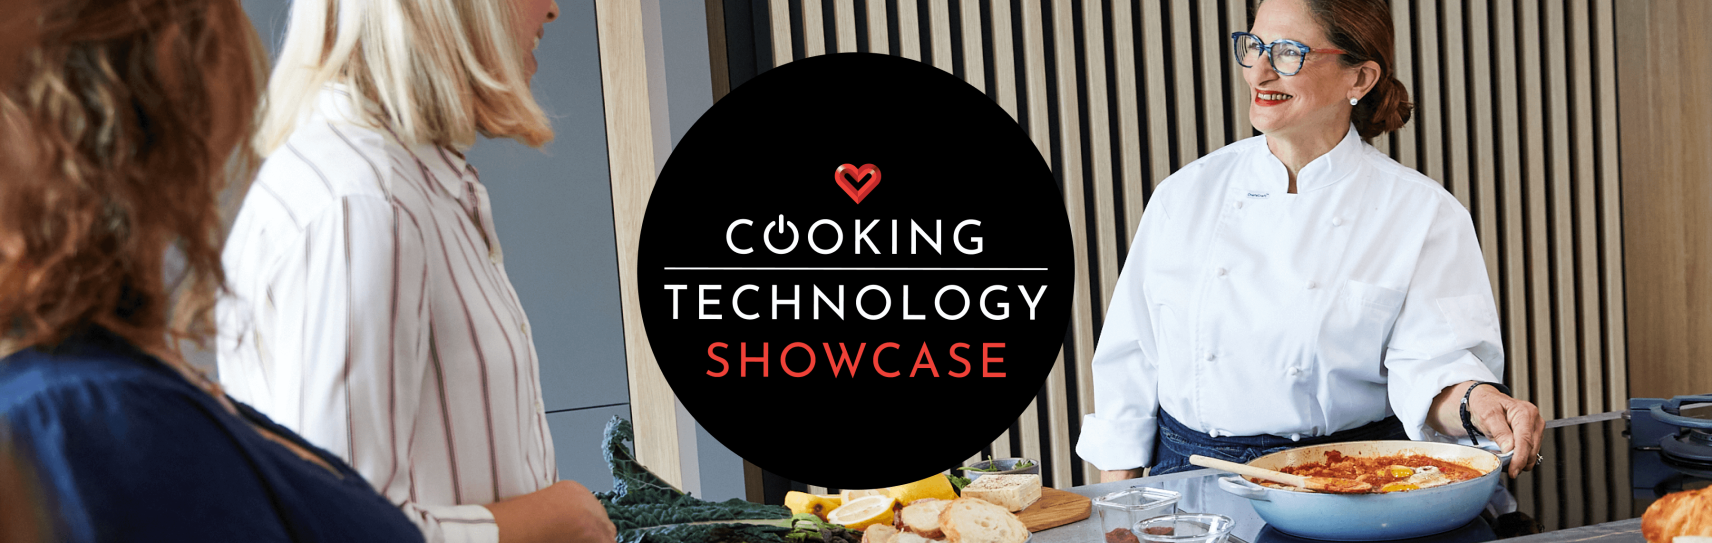 Elevate+Your+Cooking+with+the+Latest+Kitchen+Technology